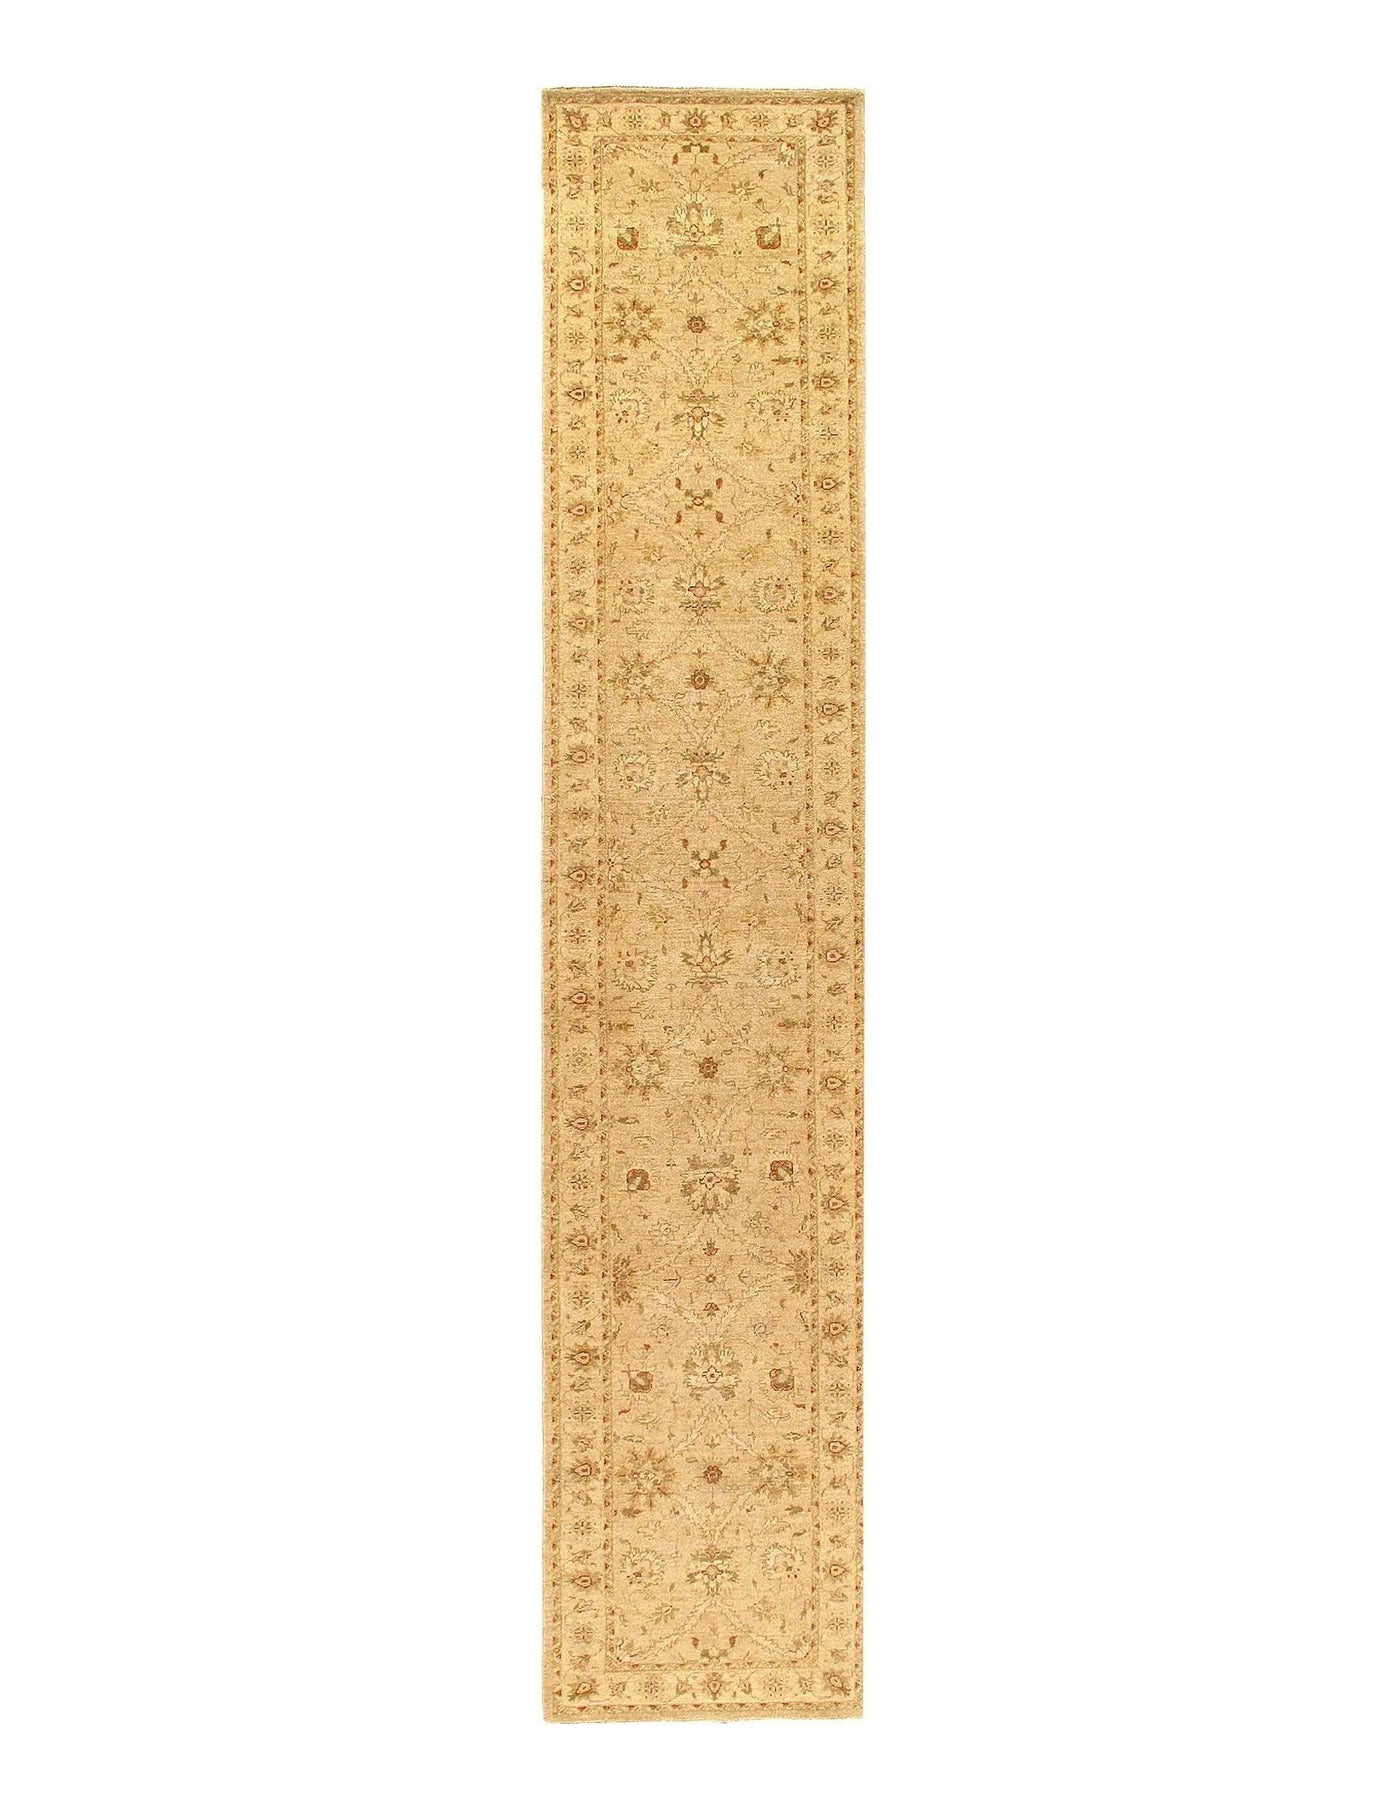 Ivory Fine Hand Knotted Farahan runner - 2'9'' X 17'6''